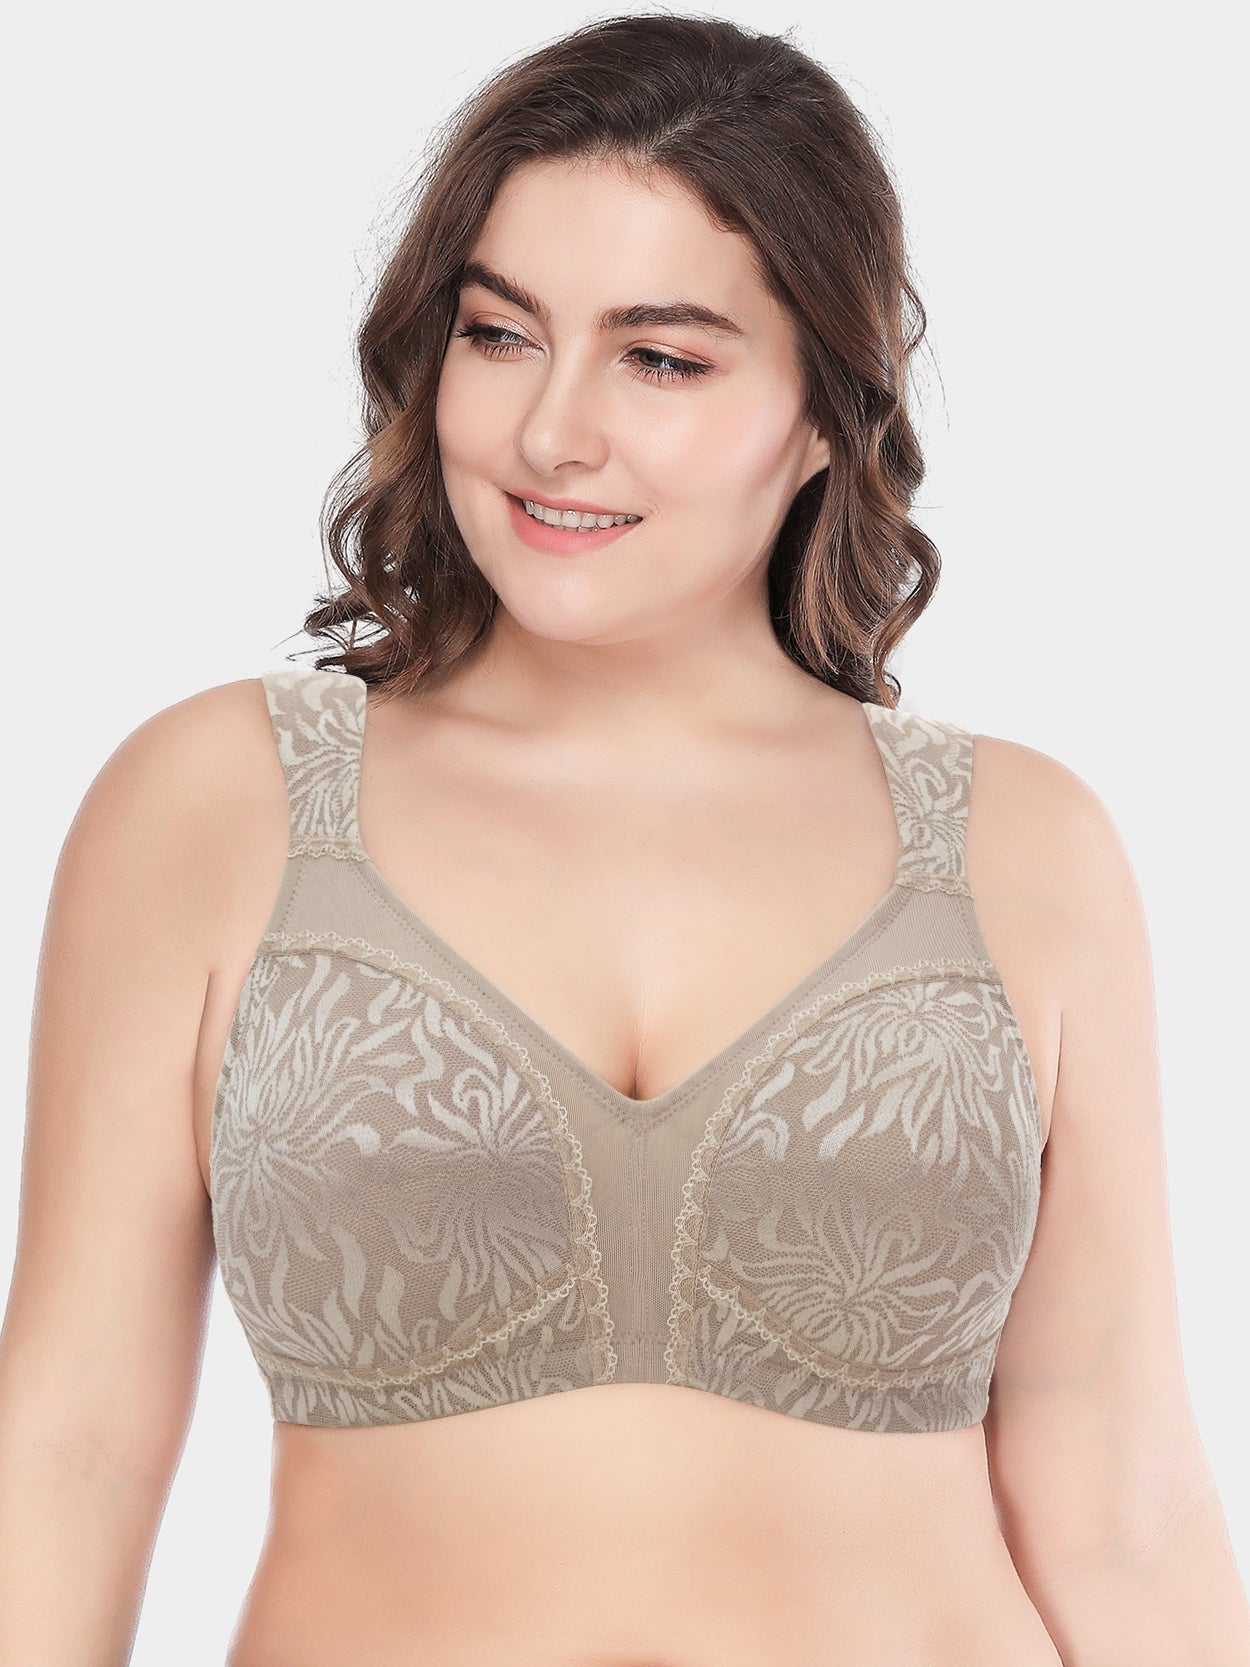 Wingslove beige colored wirefree bra size 44b new with tags full